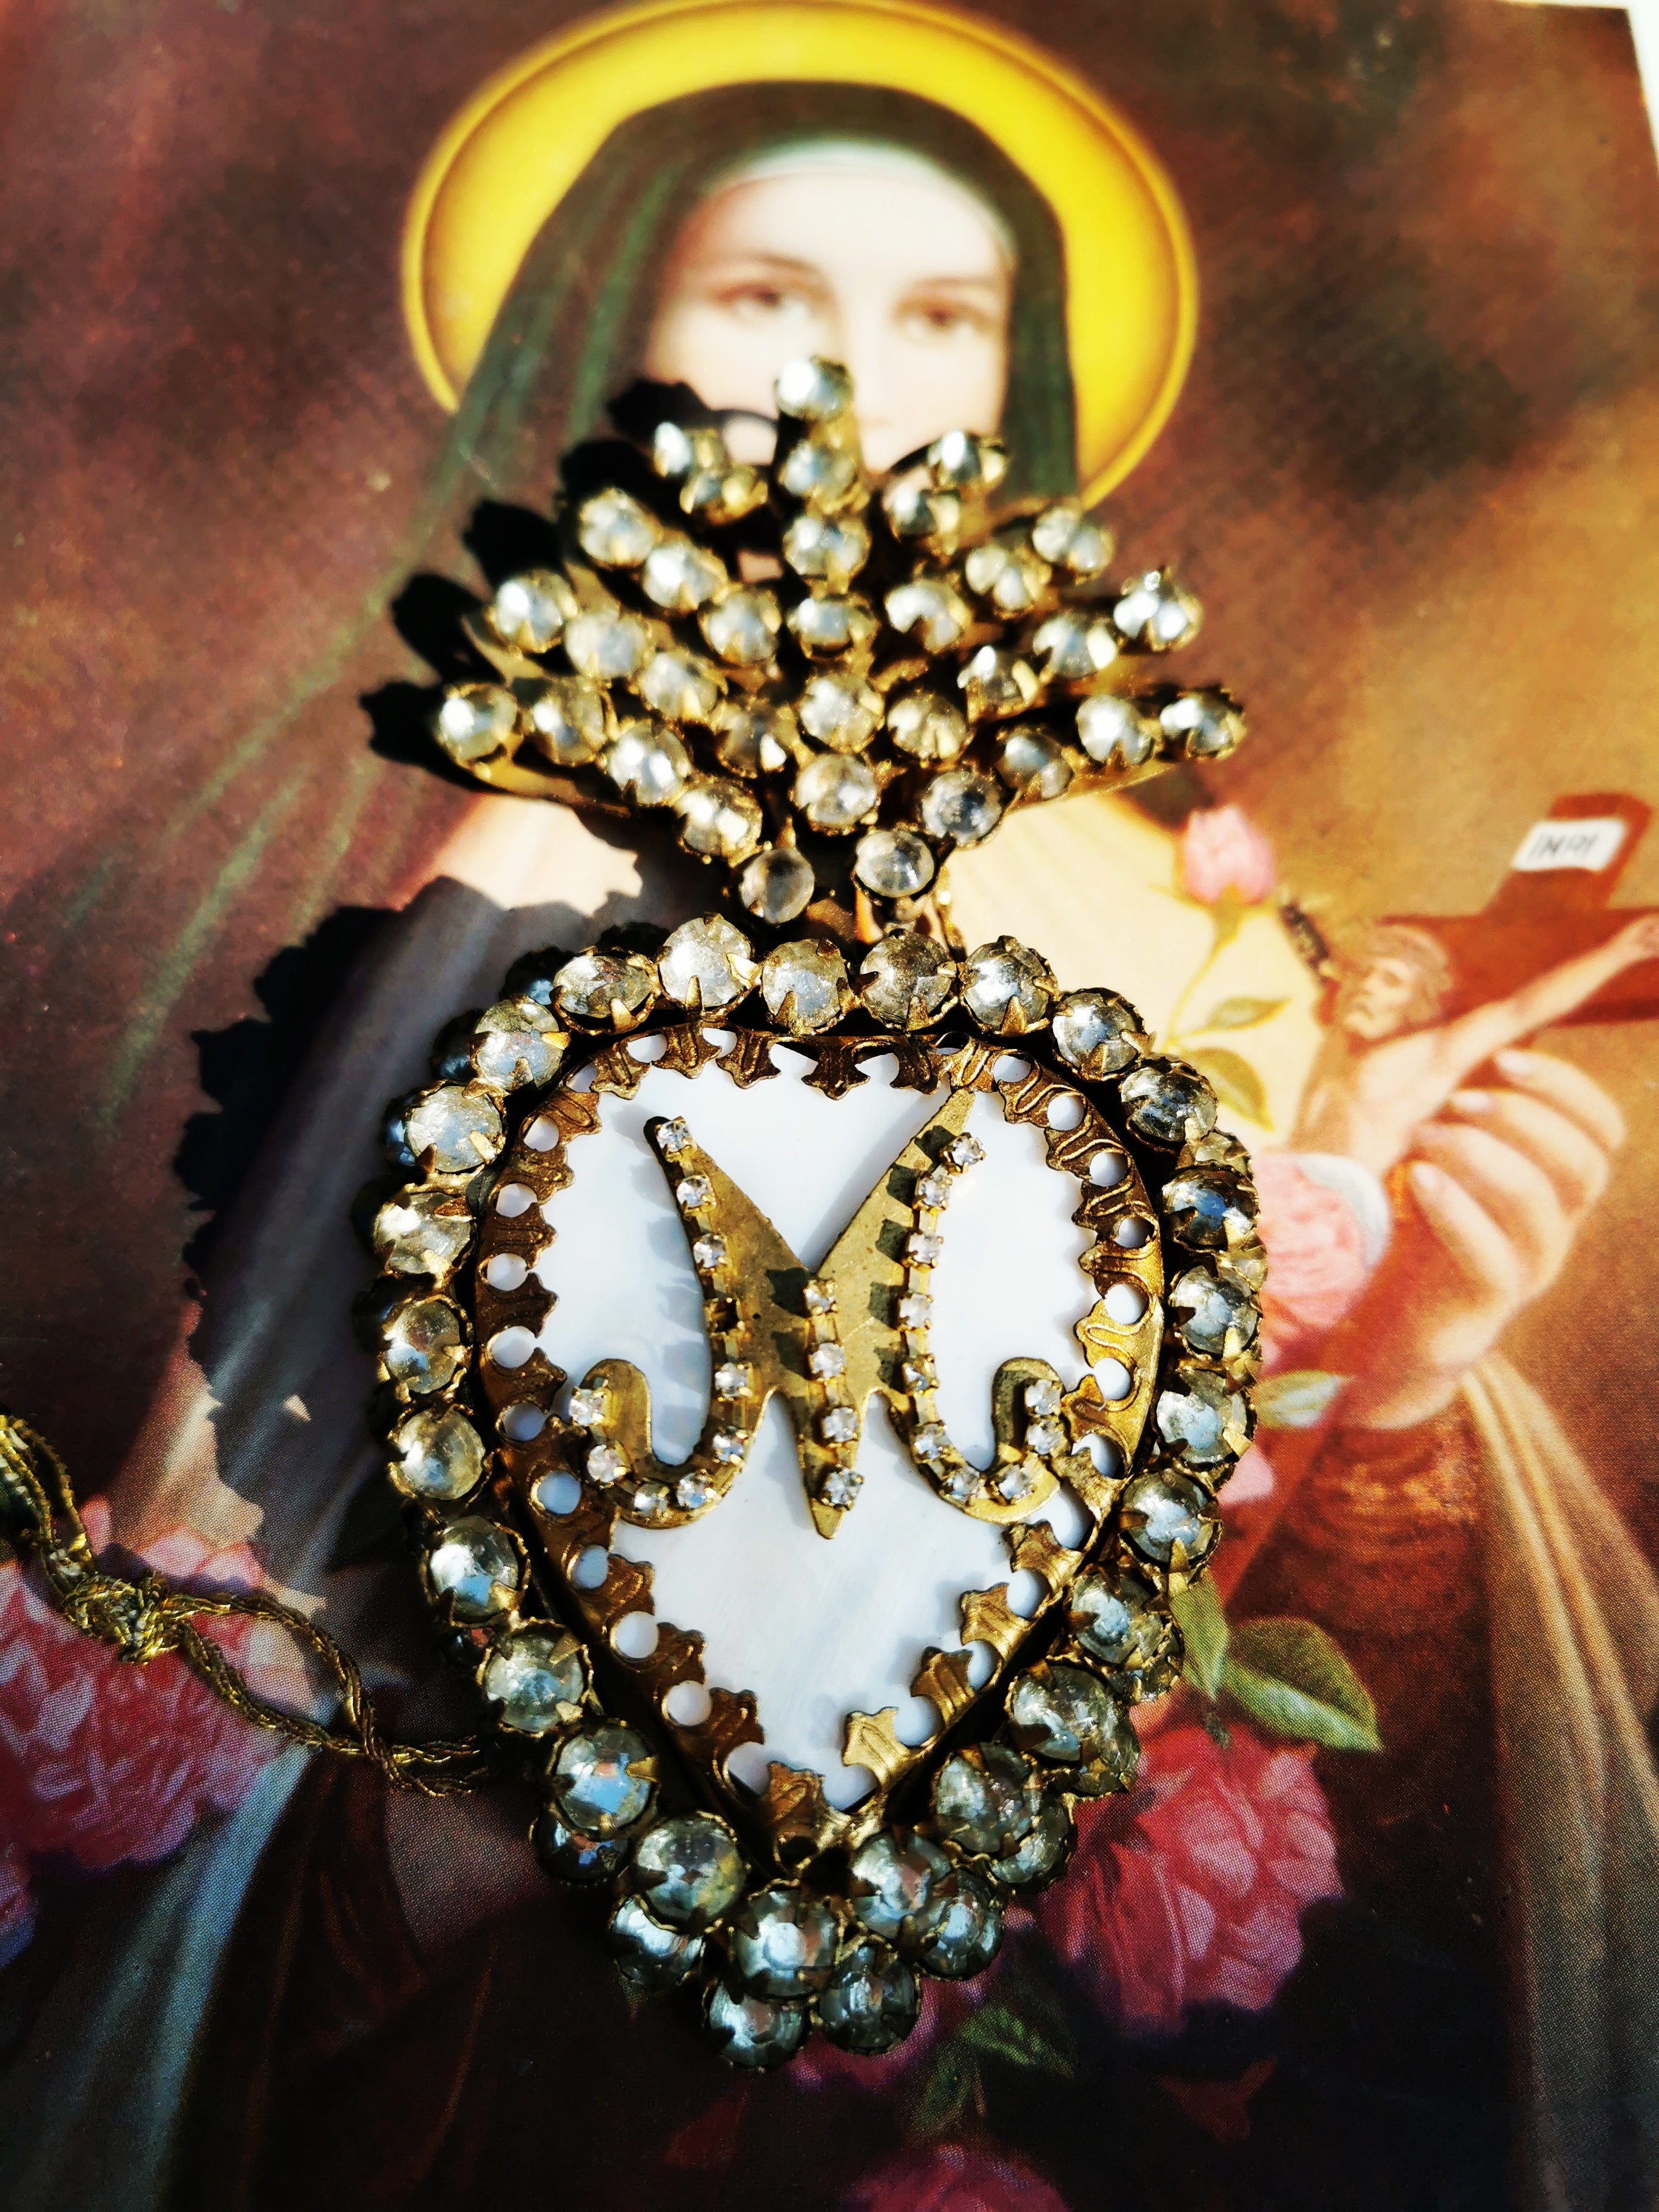 Jewelled and set with mother of pearl, this gorgeous Sacred heart cachet opens at the back to hold or present precious or secret memories. 

13 x 7 x 2cm

Brass,rhinestones,mother of pearl. 

